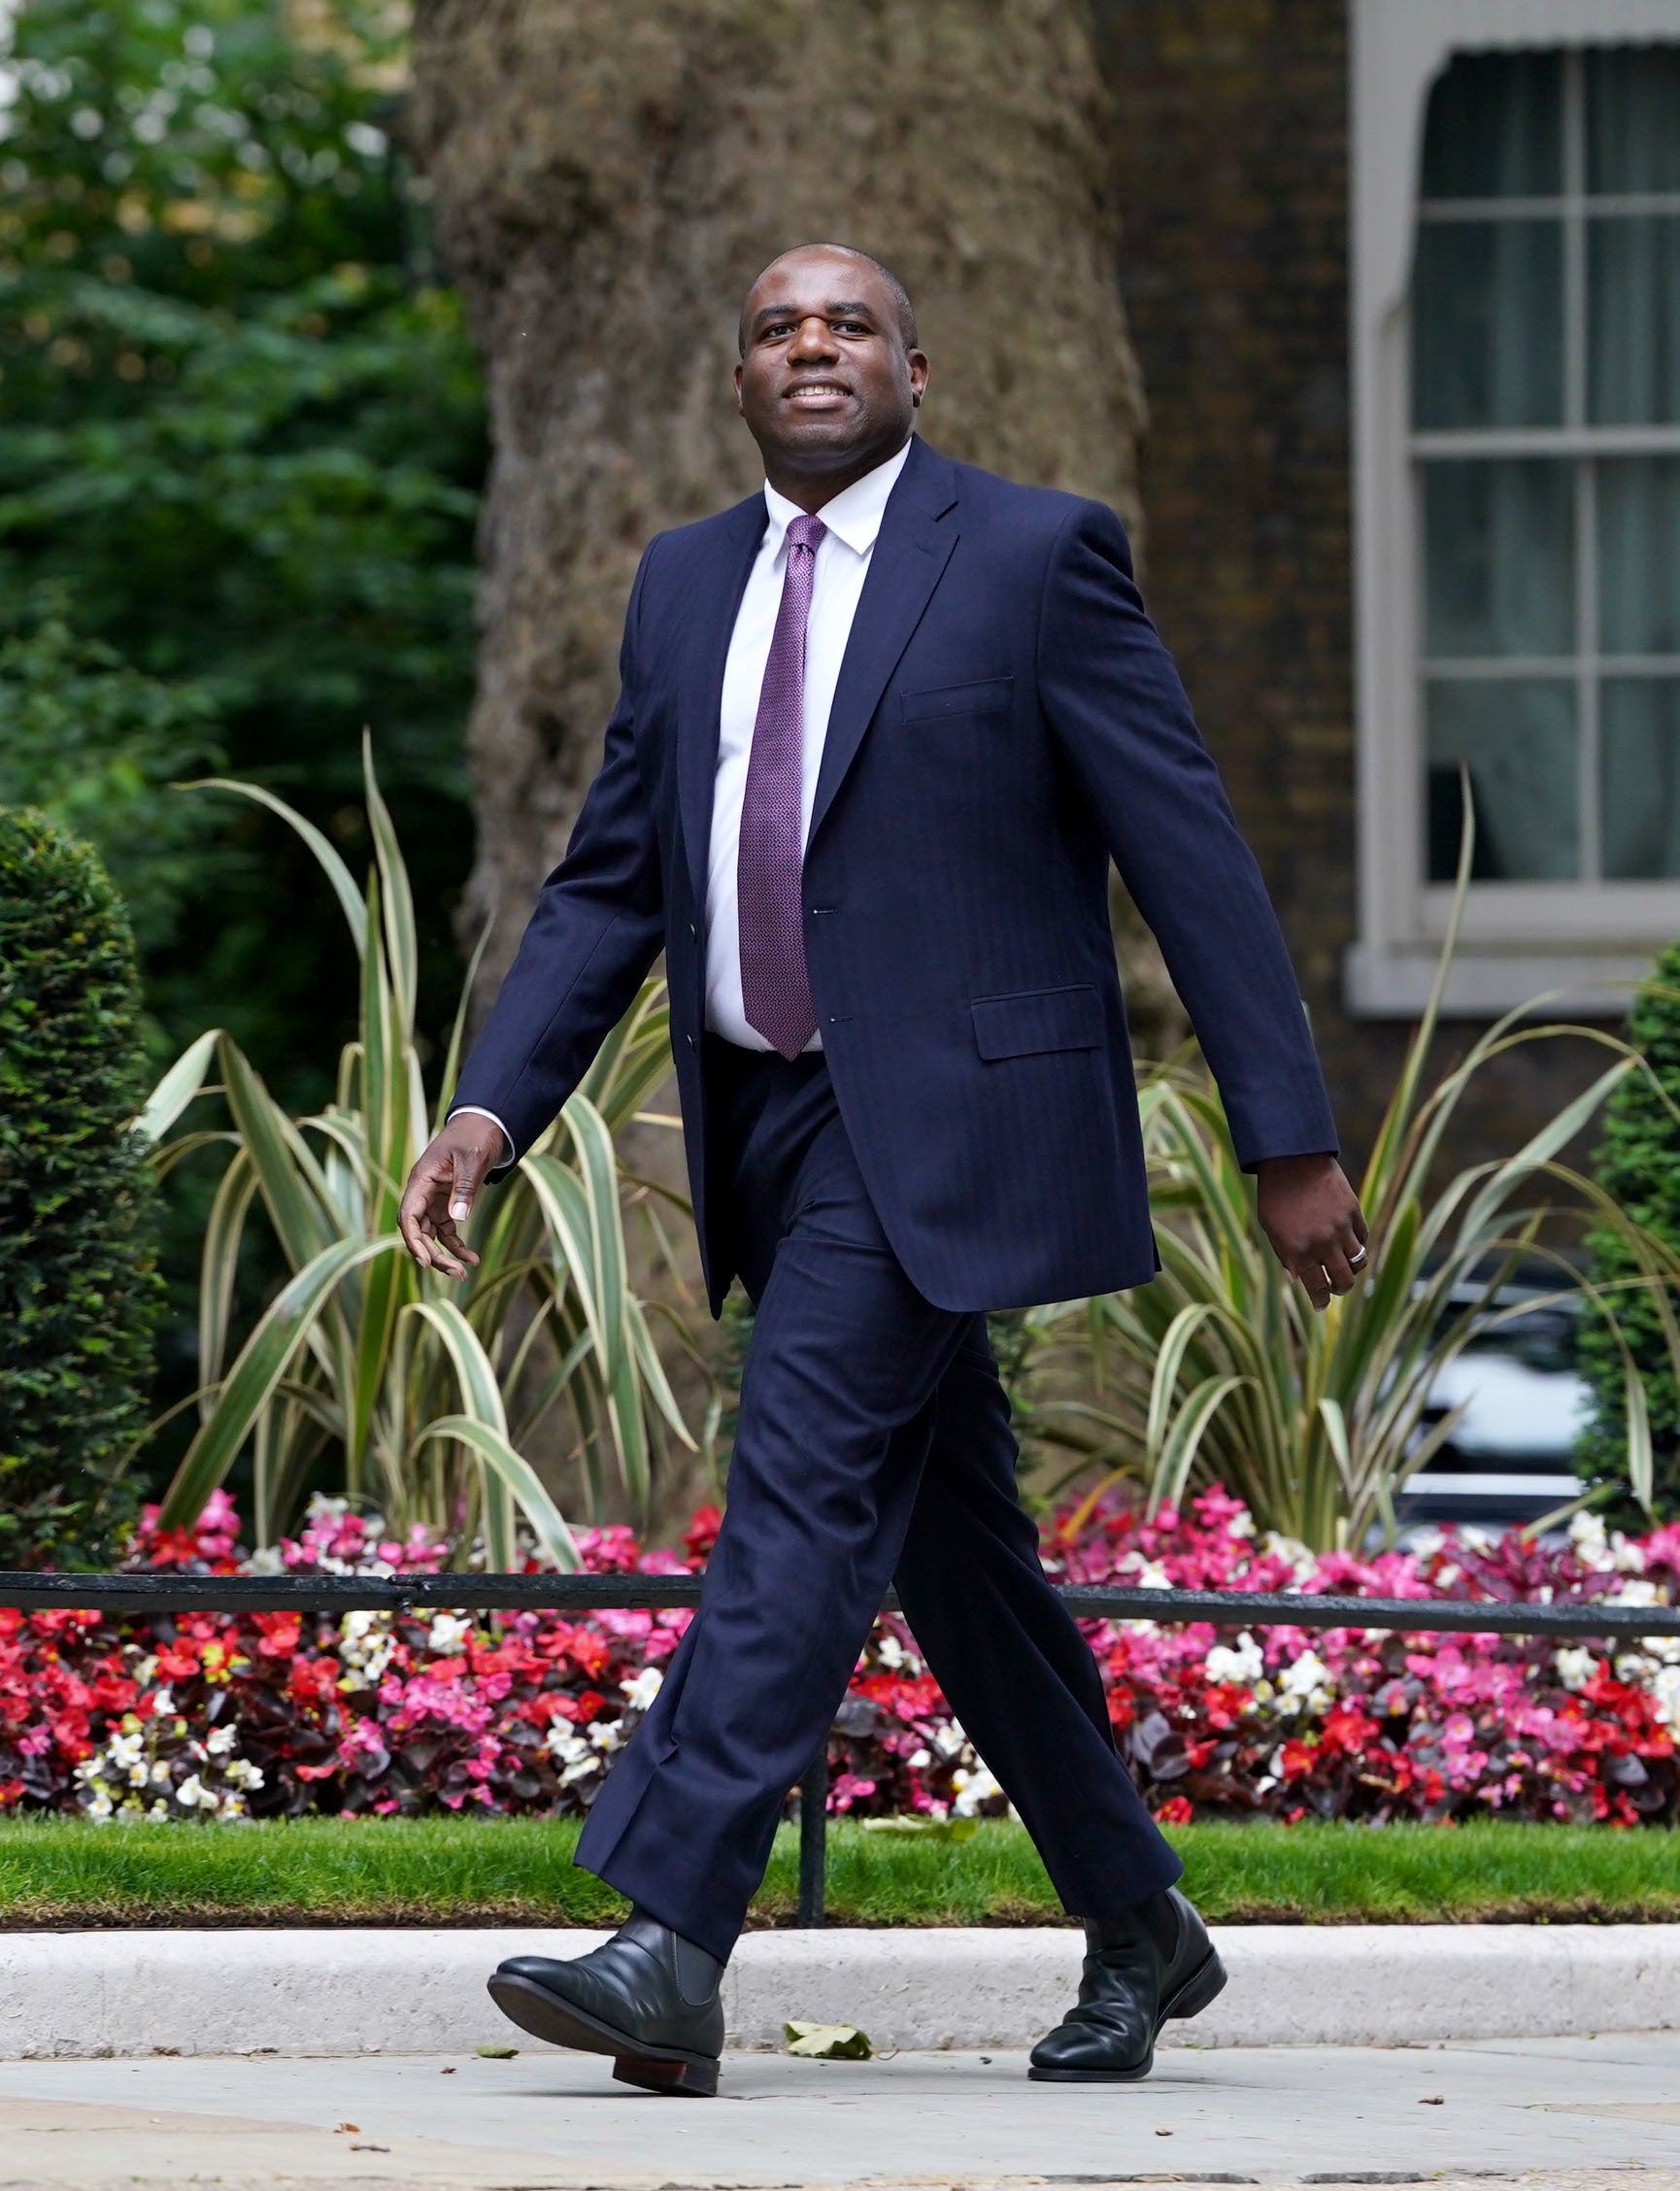 Ireland’s deputy premier Micheal Martin said he had spoken to the UK’s new Foreign Secretary David Lammy, pictured, on Friday evening (Lucy North/PA)